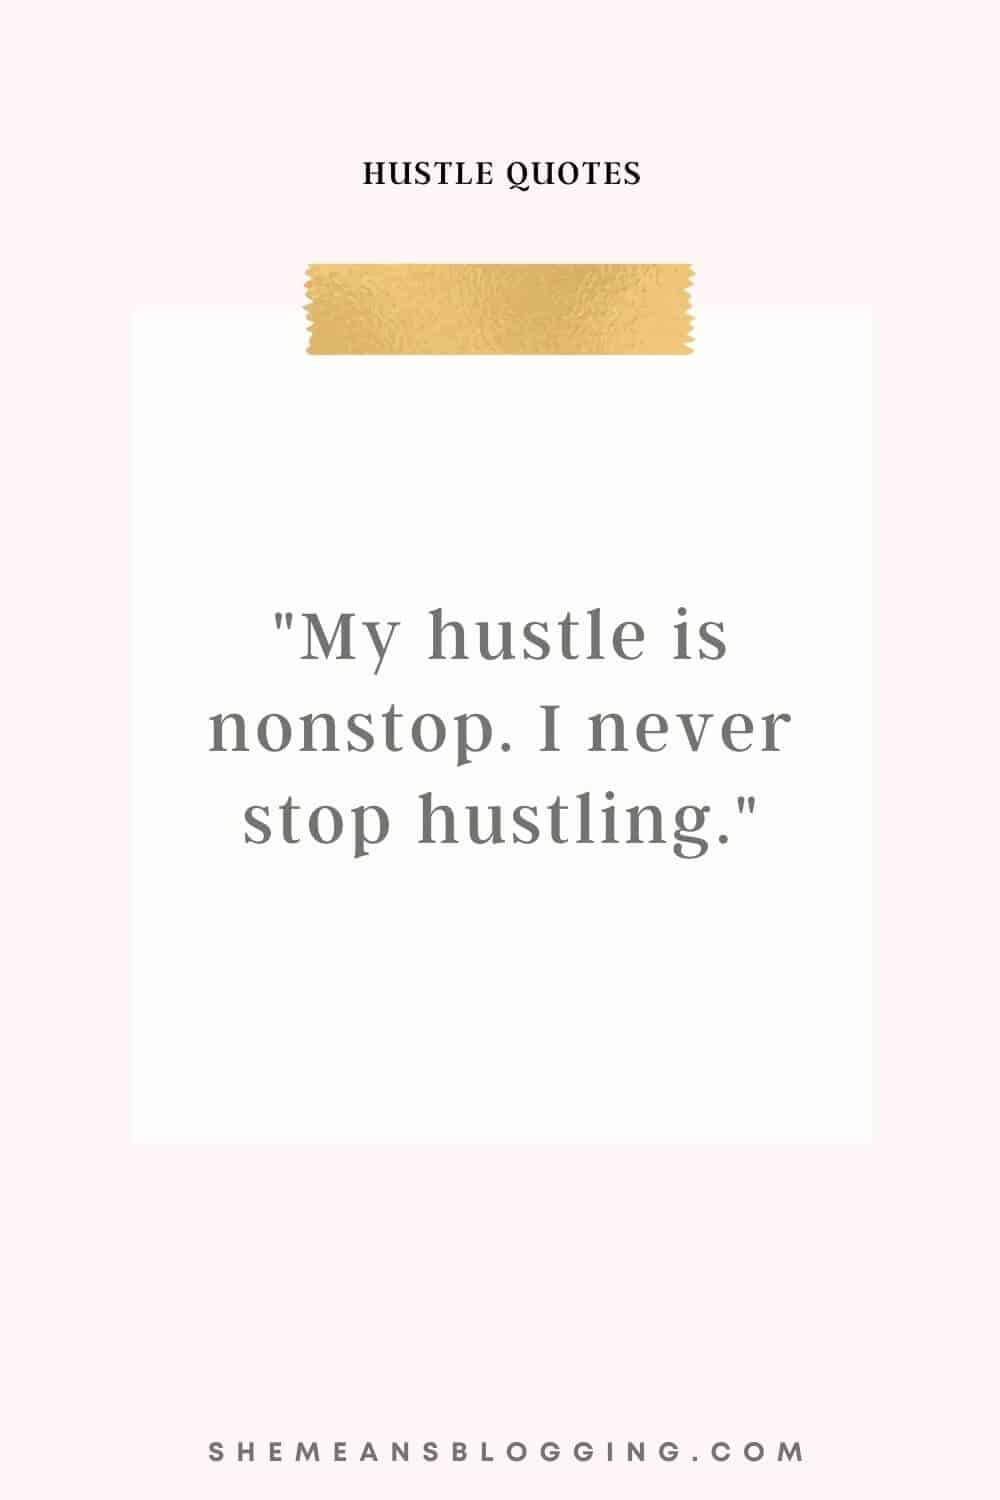 Hustle quotes for entrepreneurs and bloggers. Best inspirational quotes. Motivational quotes. 